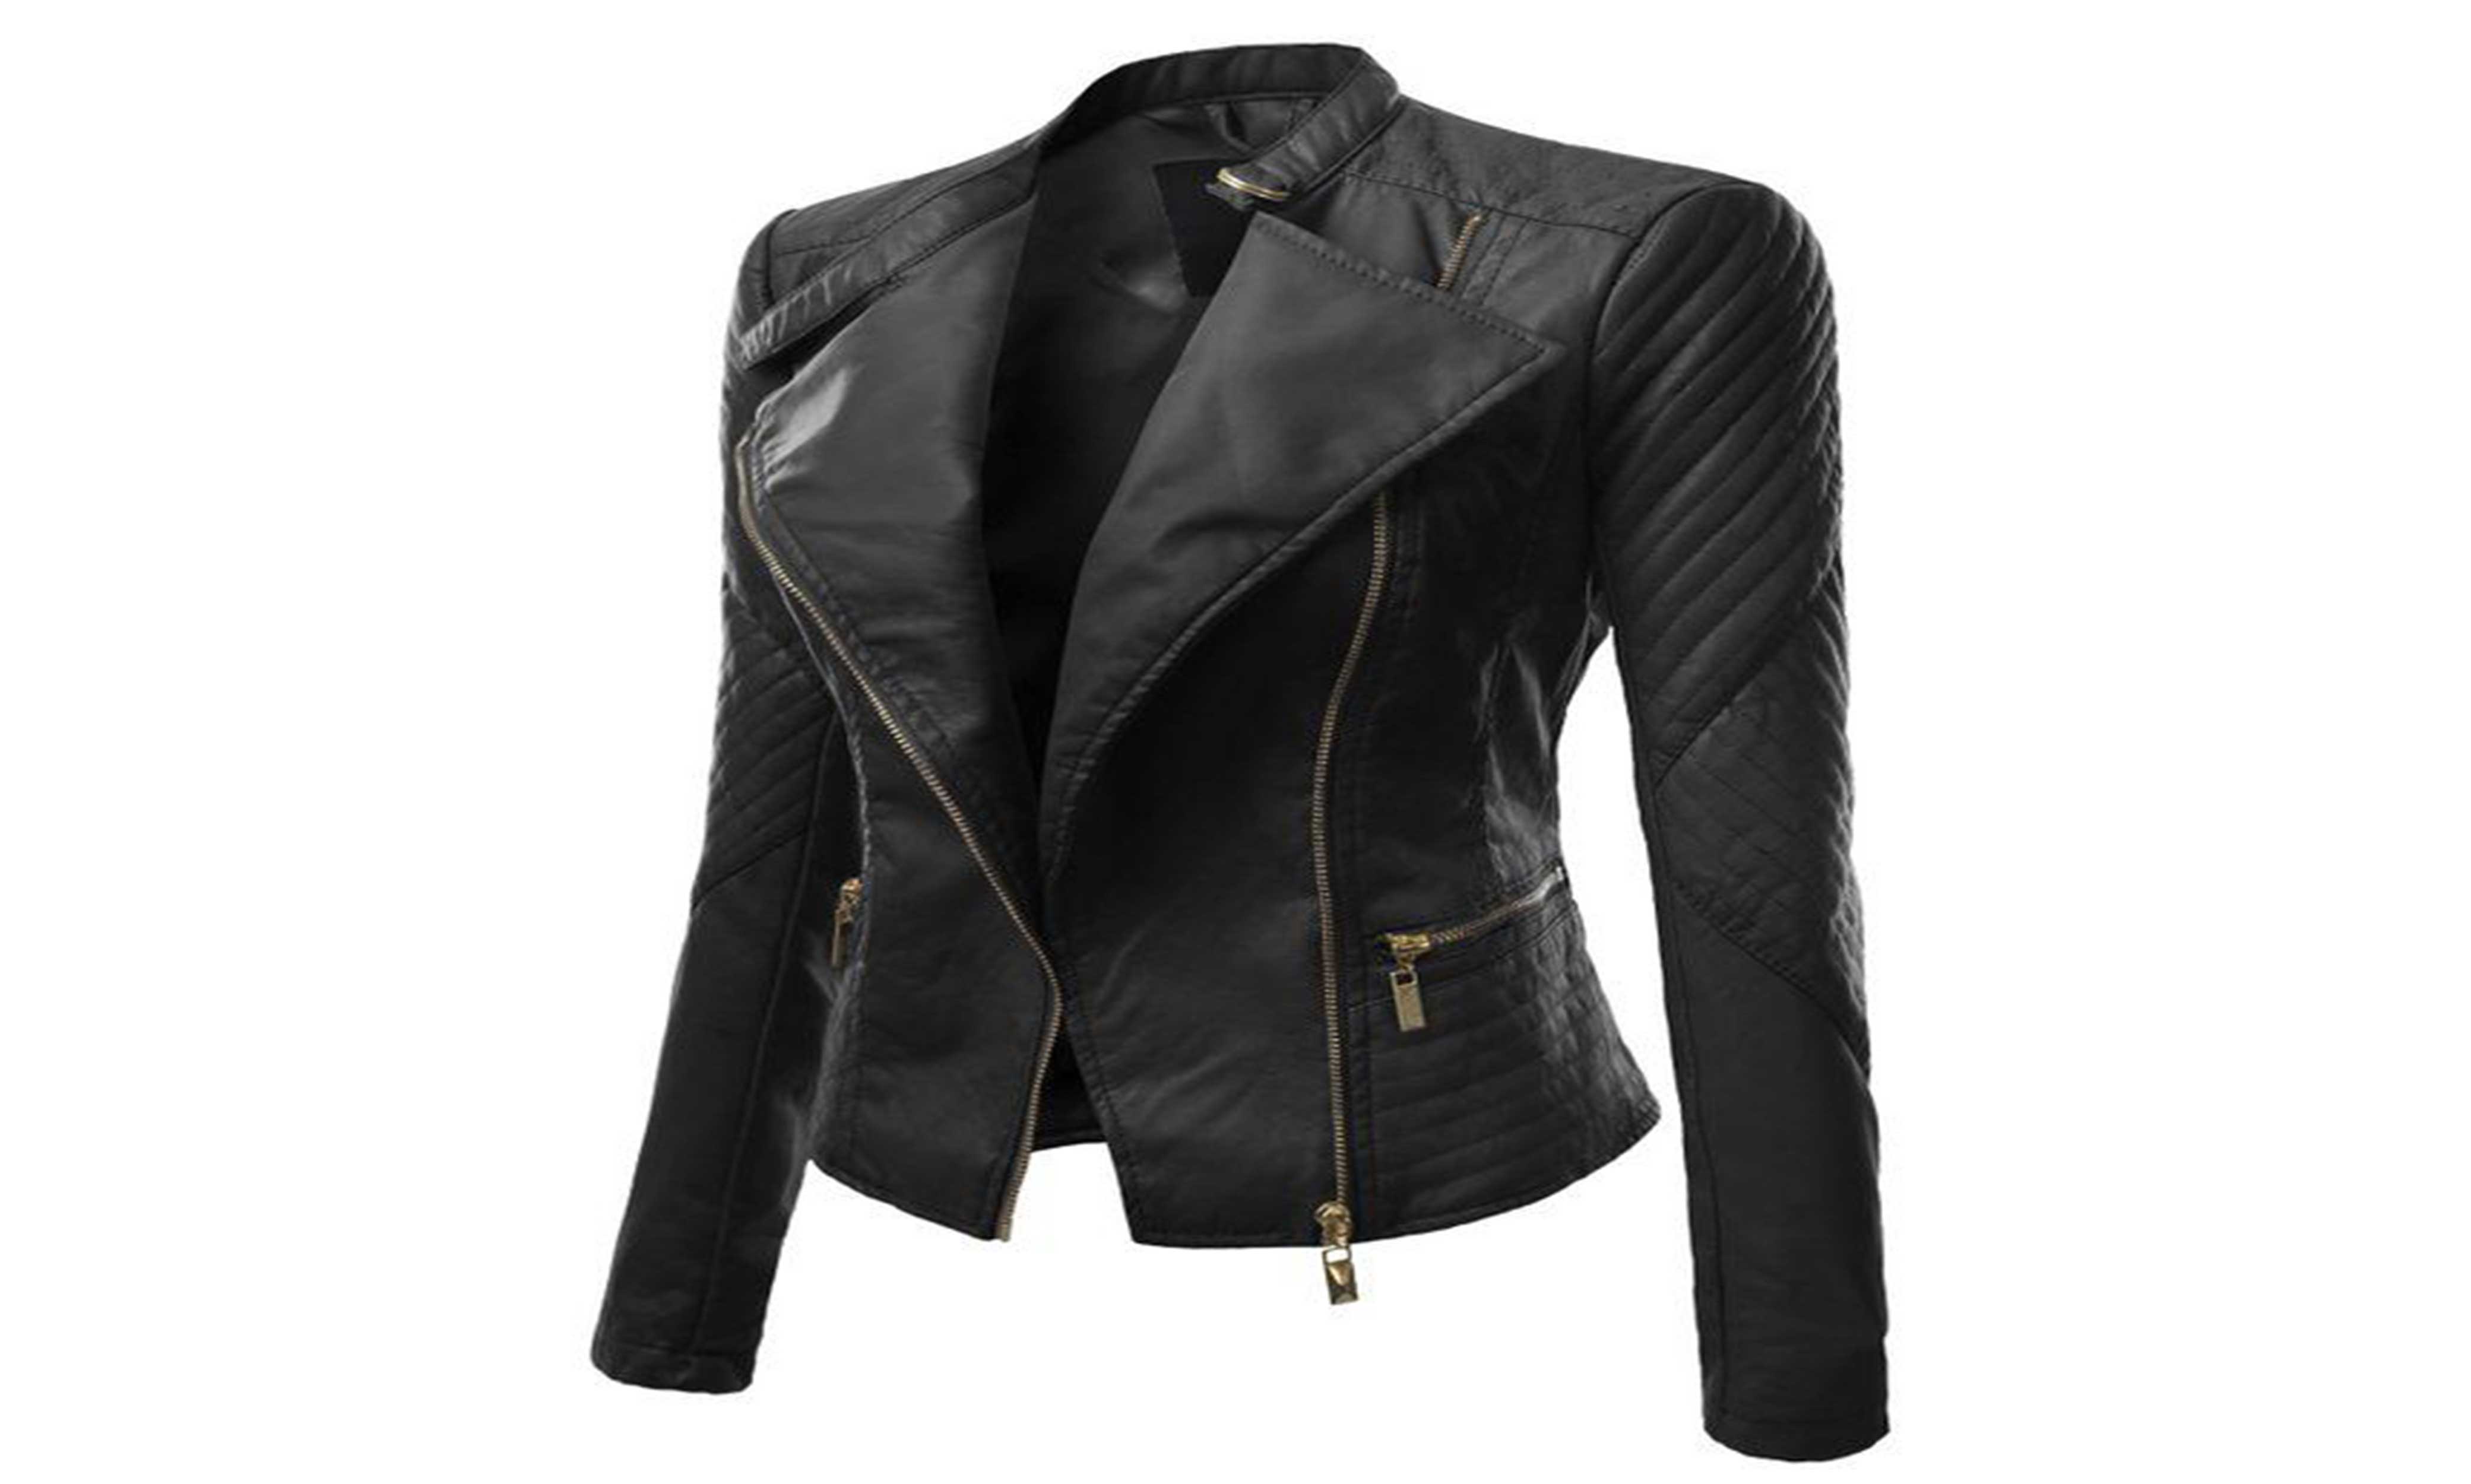  Jackets for women